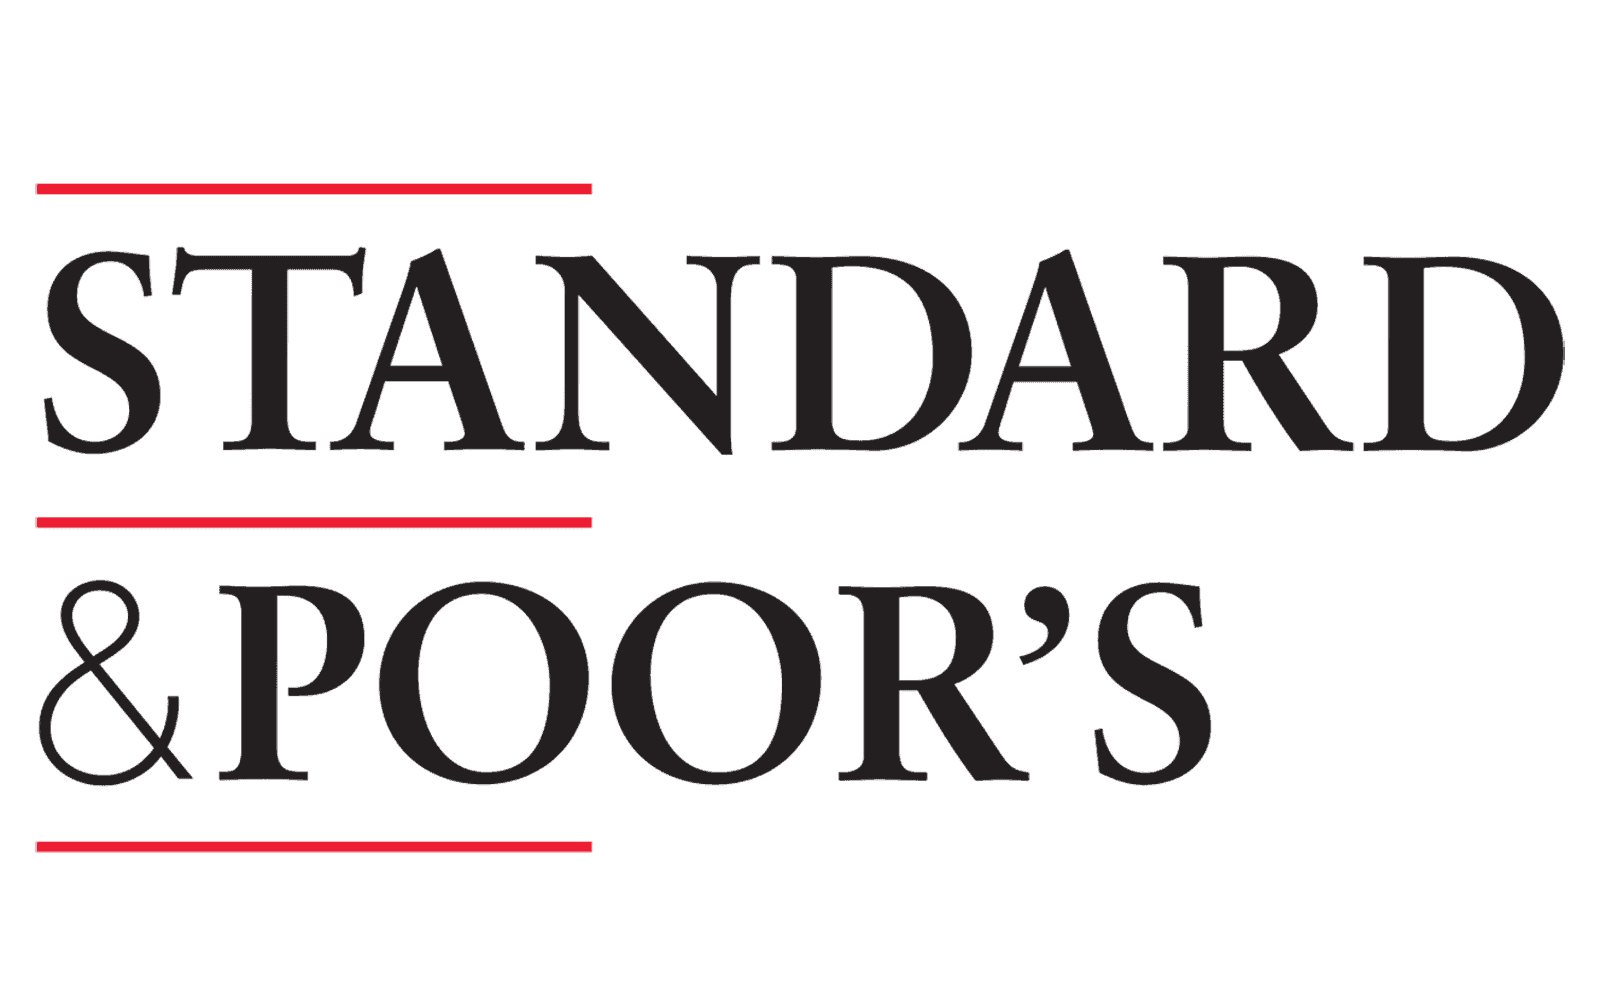 P s p ss. Standard and poors logo. Standard & poor’s. Standard poor s логотип. S P 500 лого.